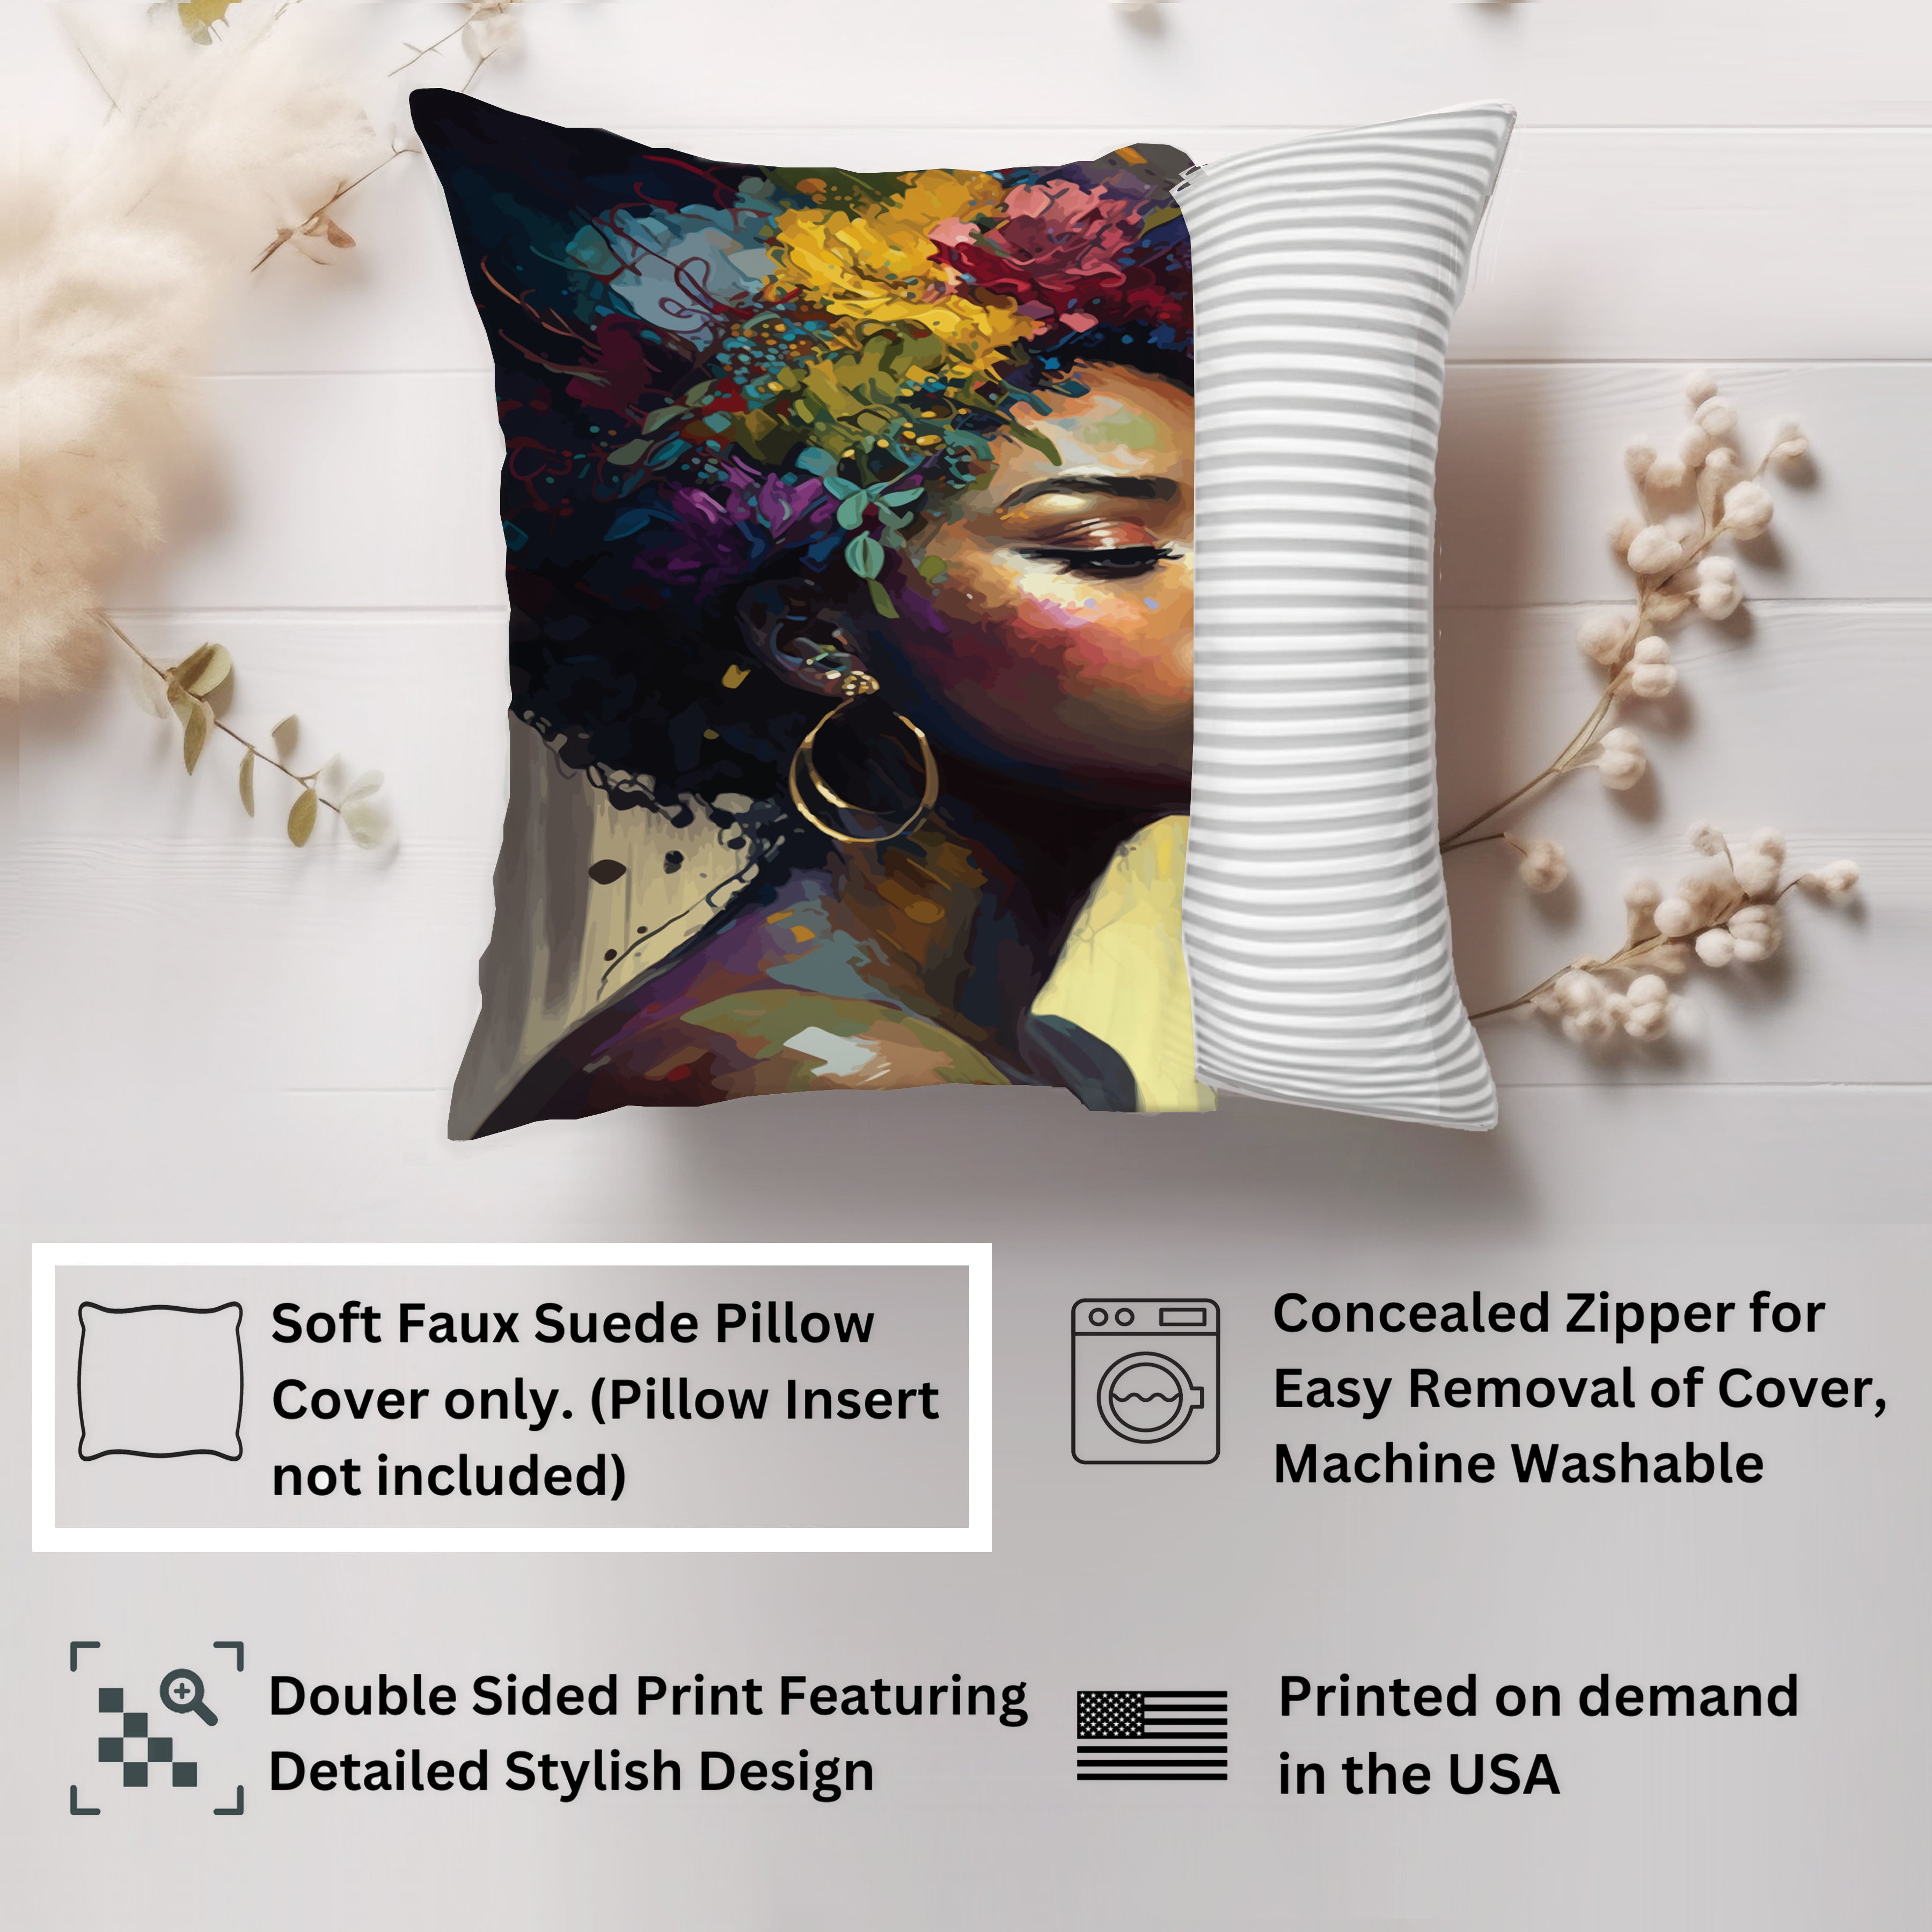 Ethan Taylor People & Portraits Throw Pillow Soft Cushion Cover 'Black Woman Portrait, African American Art Female Portraits' Modern Decorative Square Accent Pillow Case, 16x16 Inches, Brown, Green - image 2 of 5